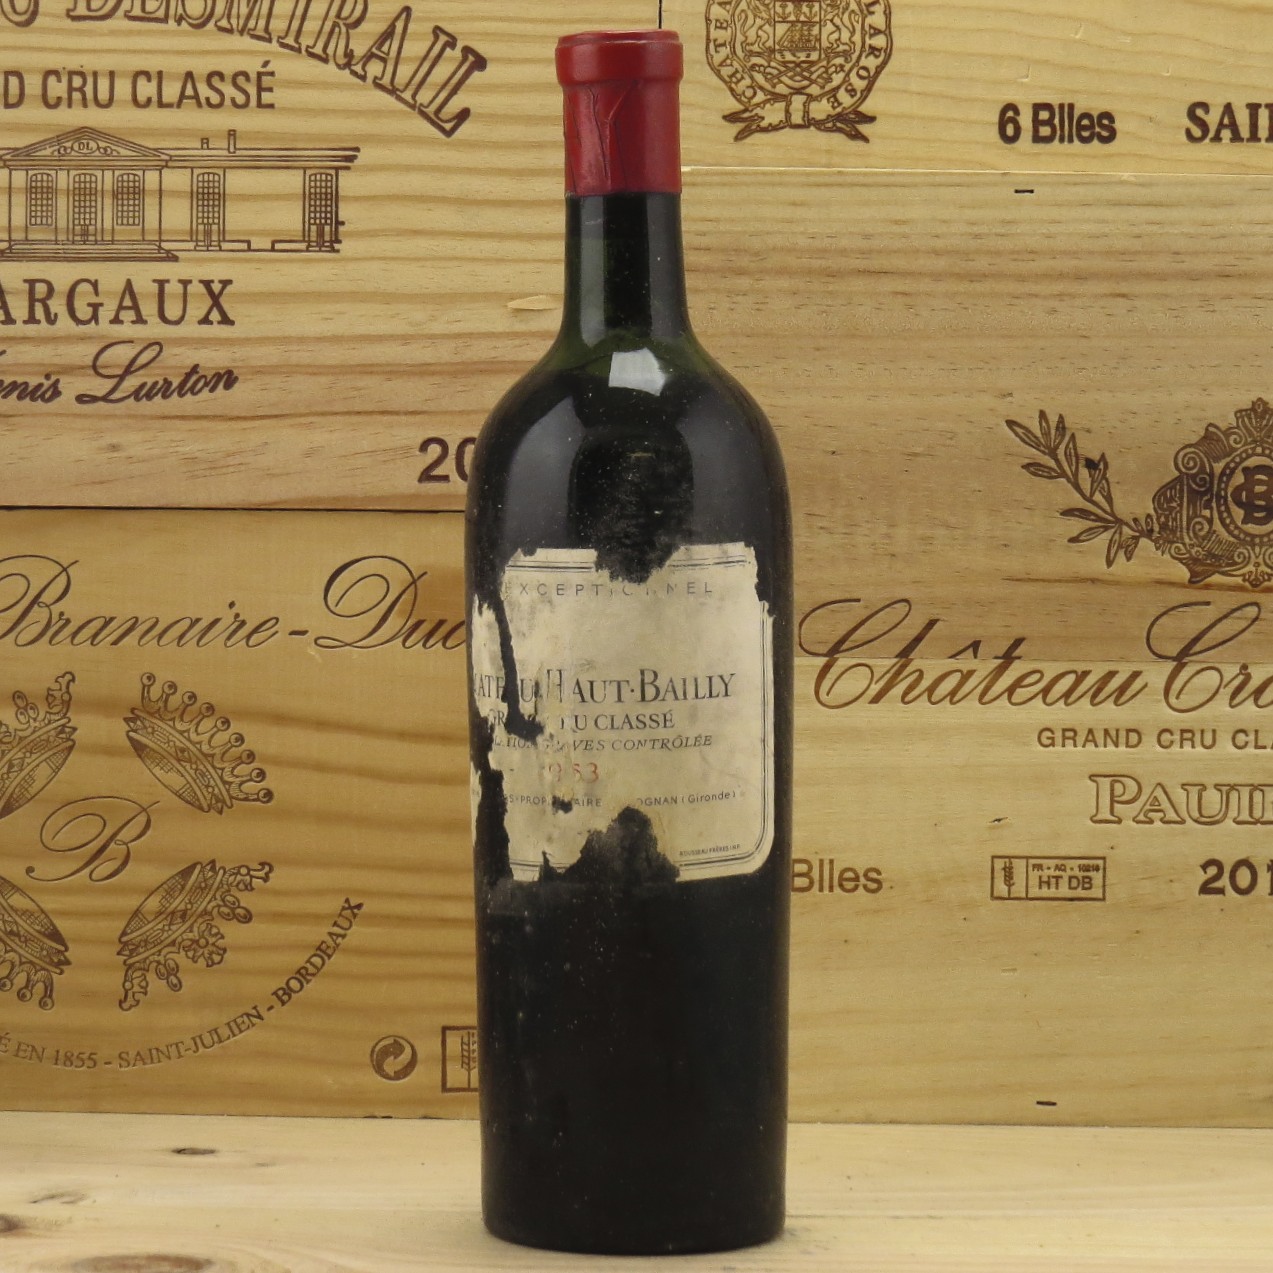 1953 Chateau Haut Bailly